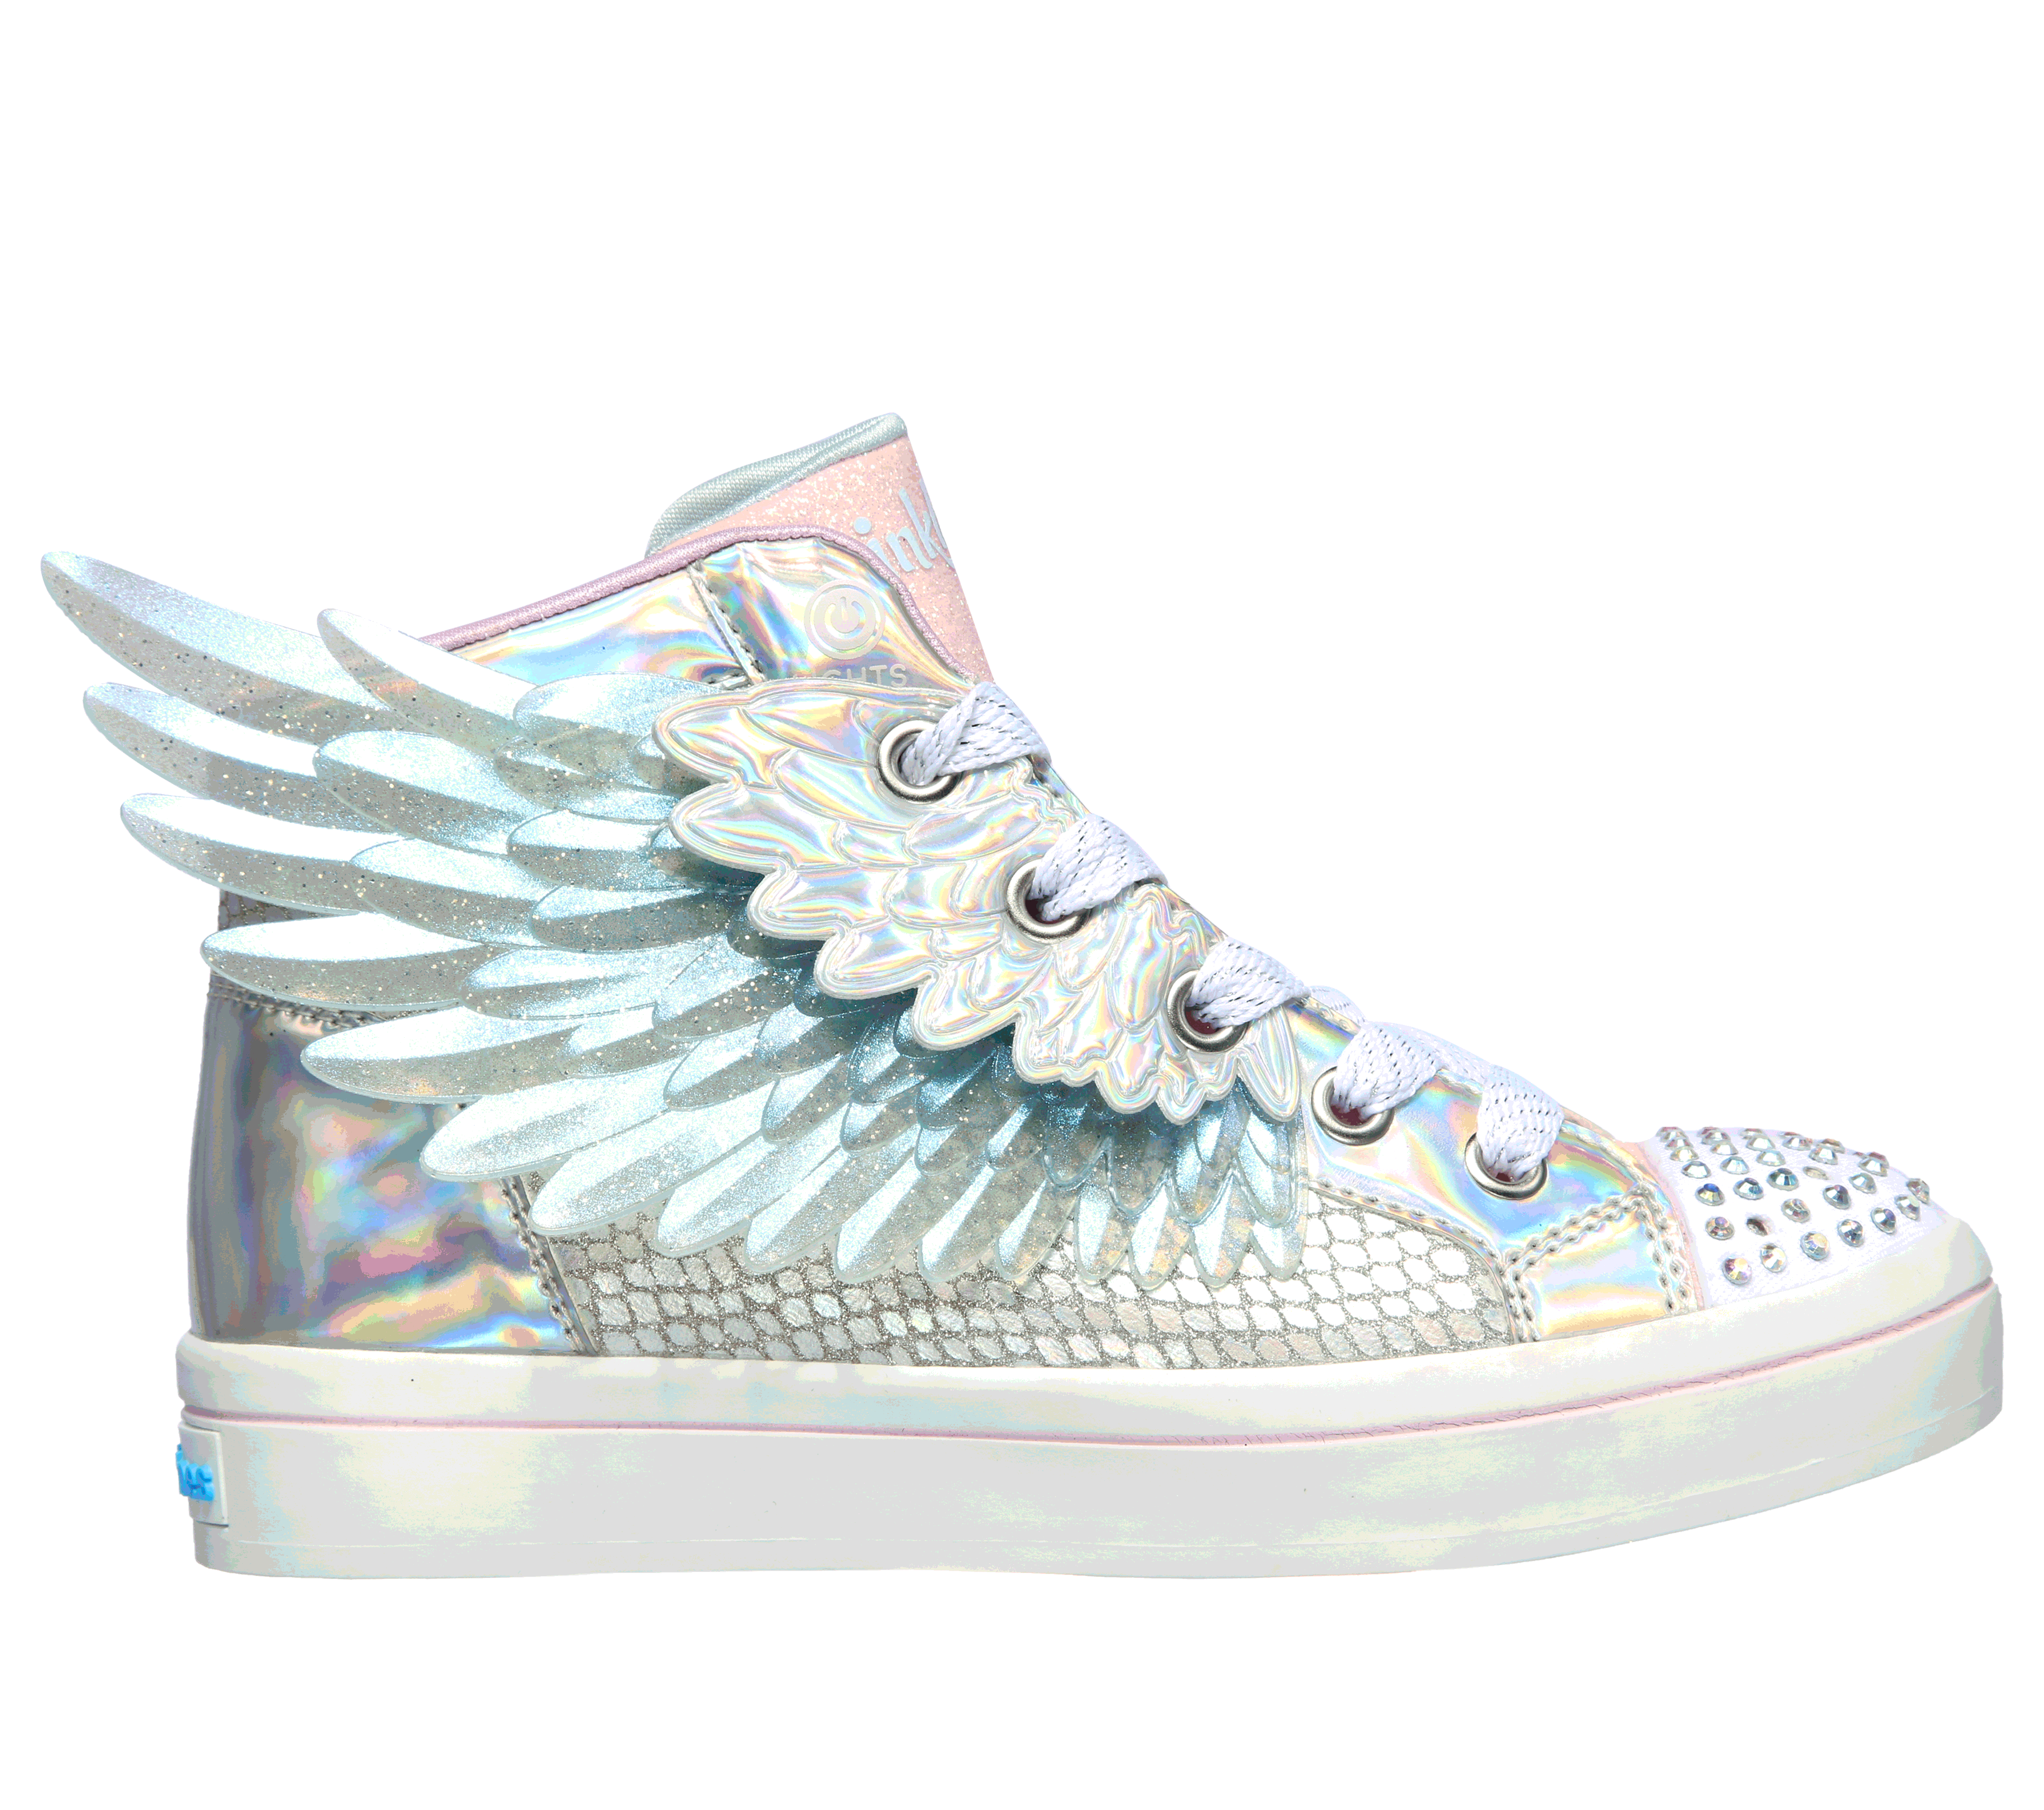 Shop the Twinkle Toes: Twi-Lites 2.0 